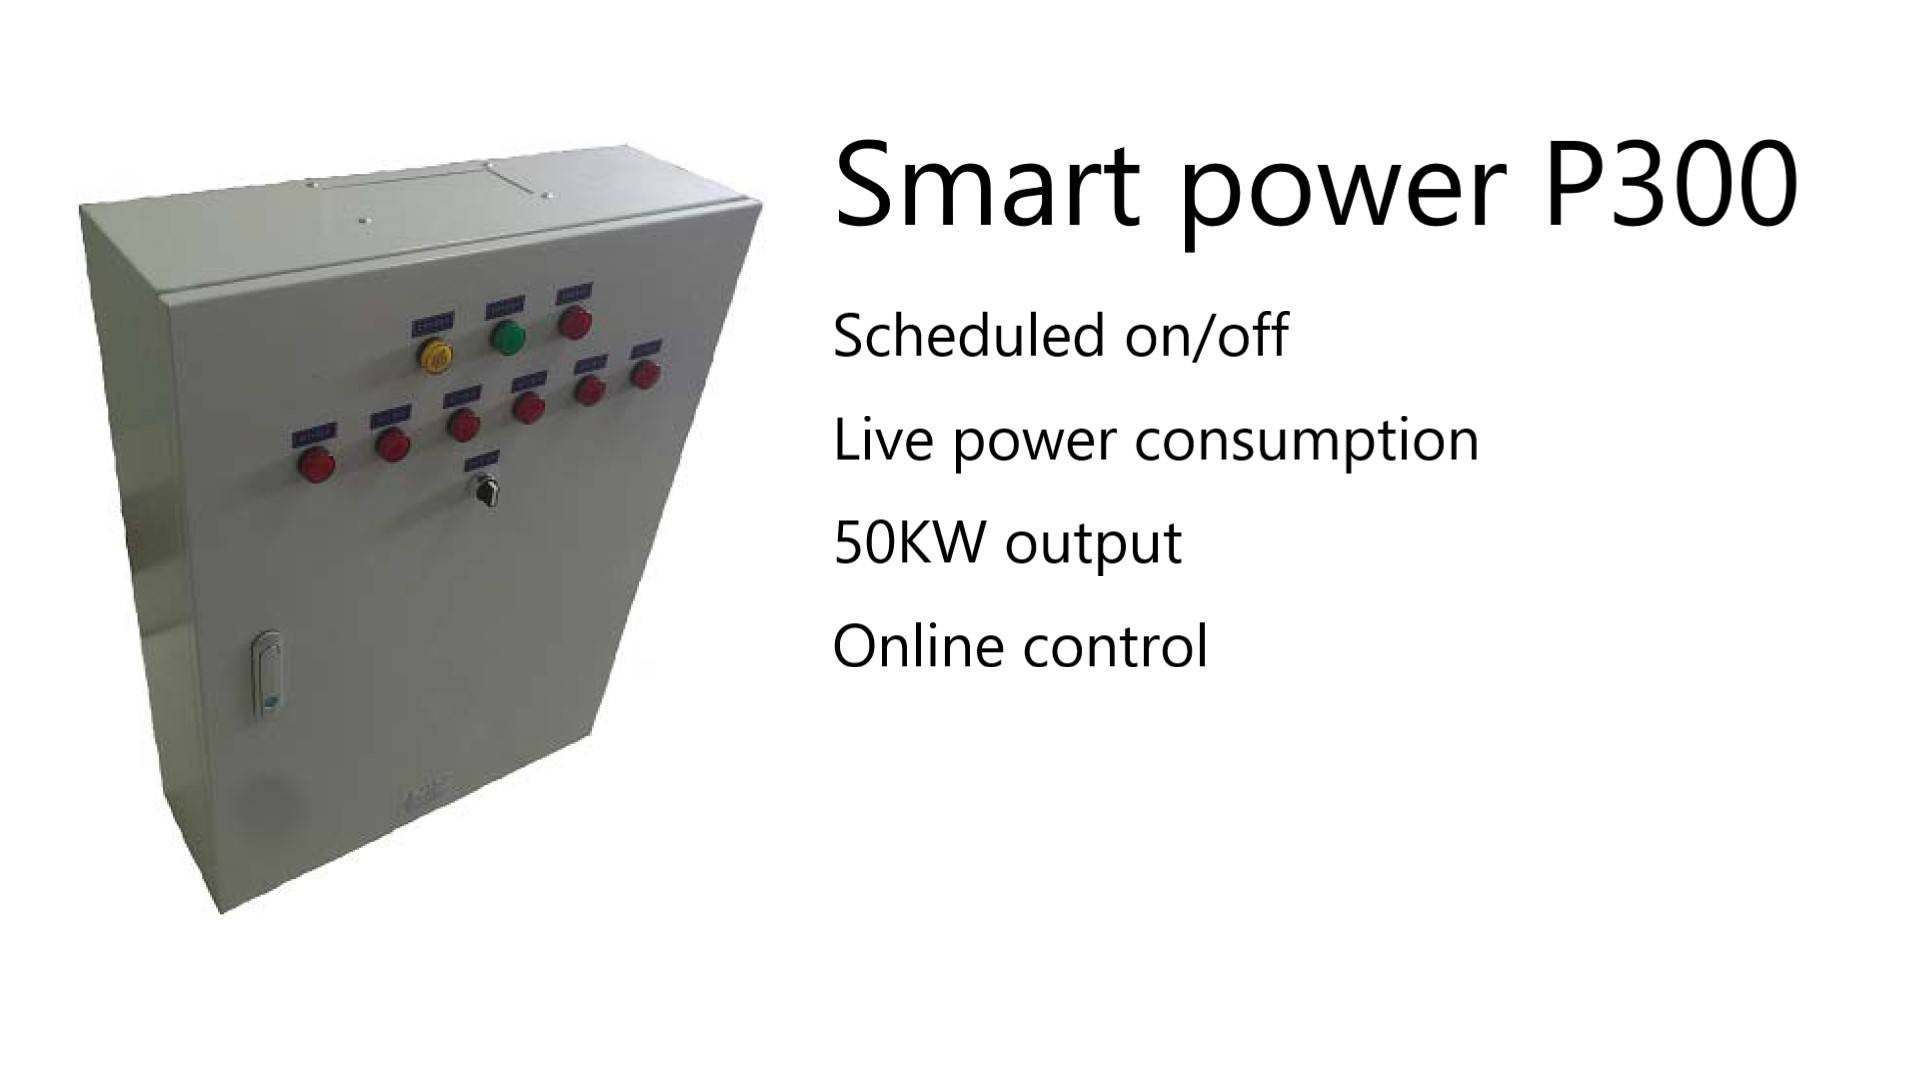 DoMedea P300 smart power box can be controled by app remotely